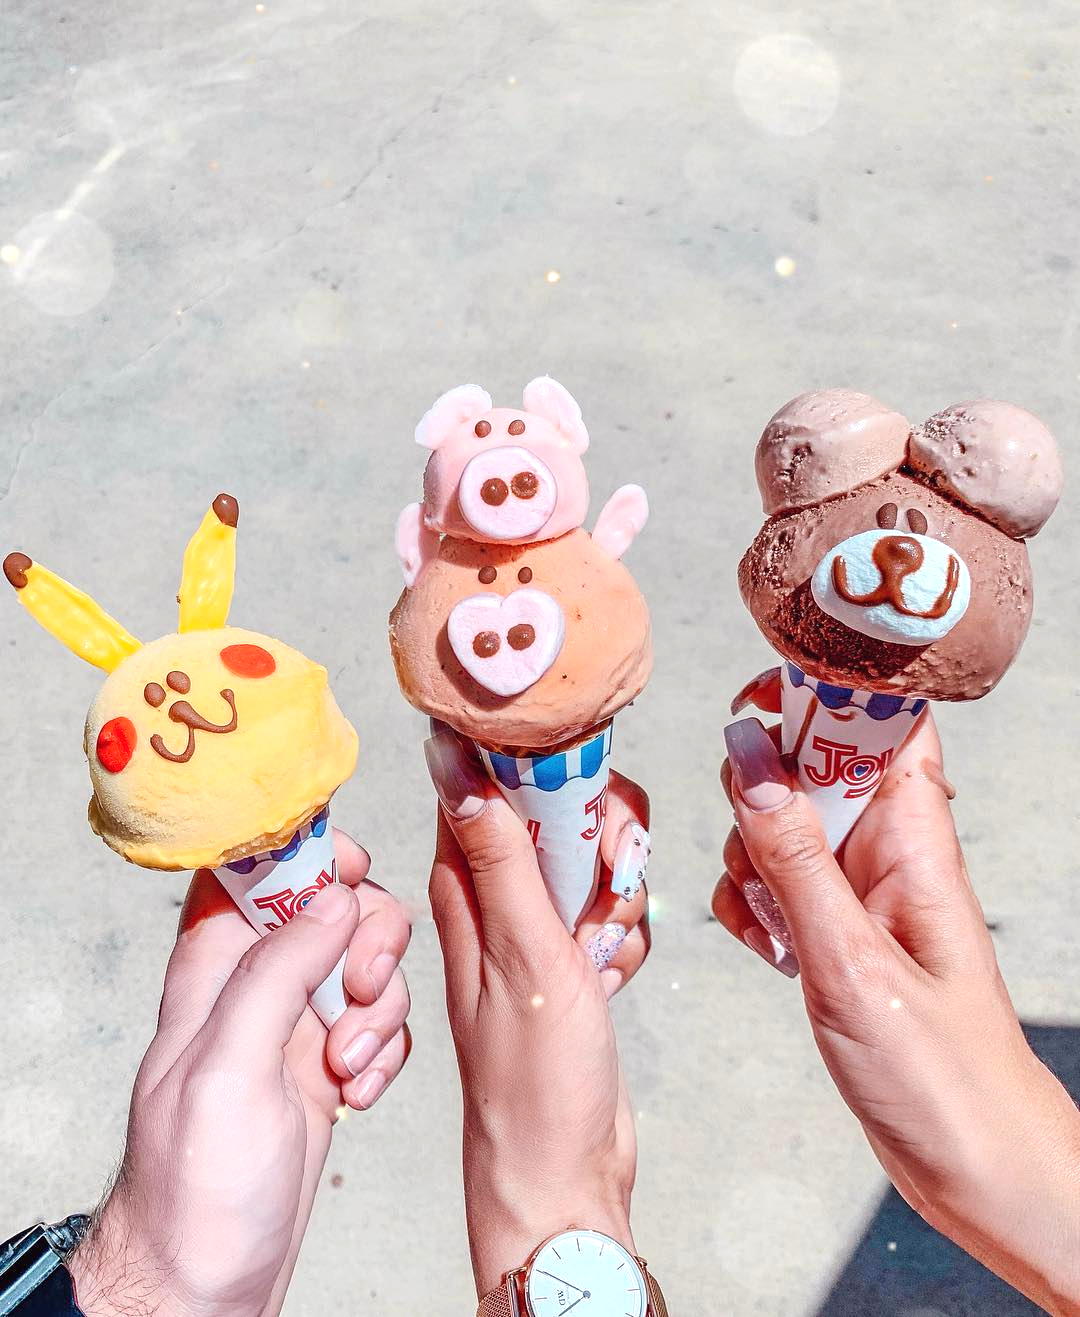 ZAFUL.com - Wow, so cute!! What is your favorite flavor of ice cream?😜😜 @margaux_leo⁣
⁣
.⁣
⁣⁣⁣⁣⁣⁣⁣
⁣⁣⁣⁣⁣⁣⁣
#ZAFUL #ZAFULinspo #lifestyle #Icecream